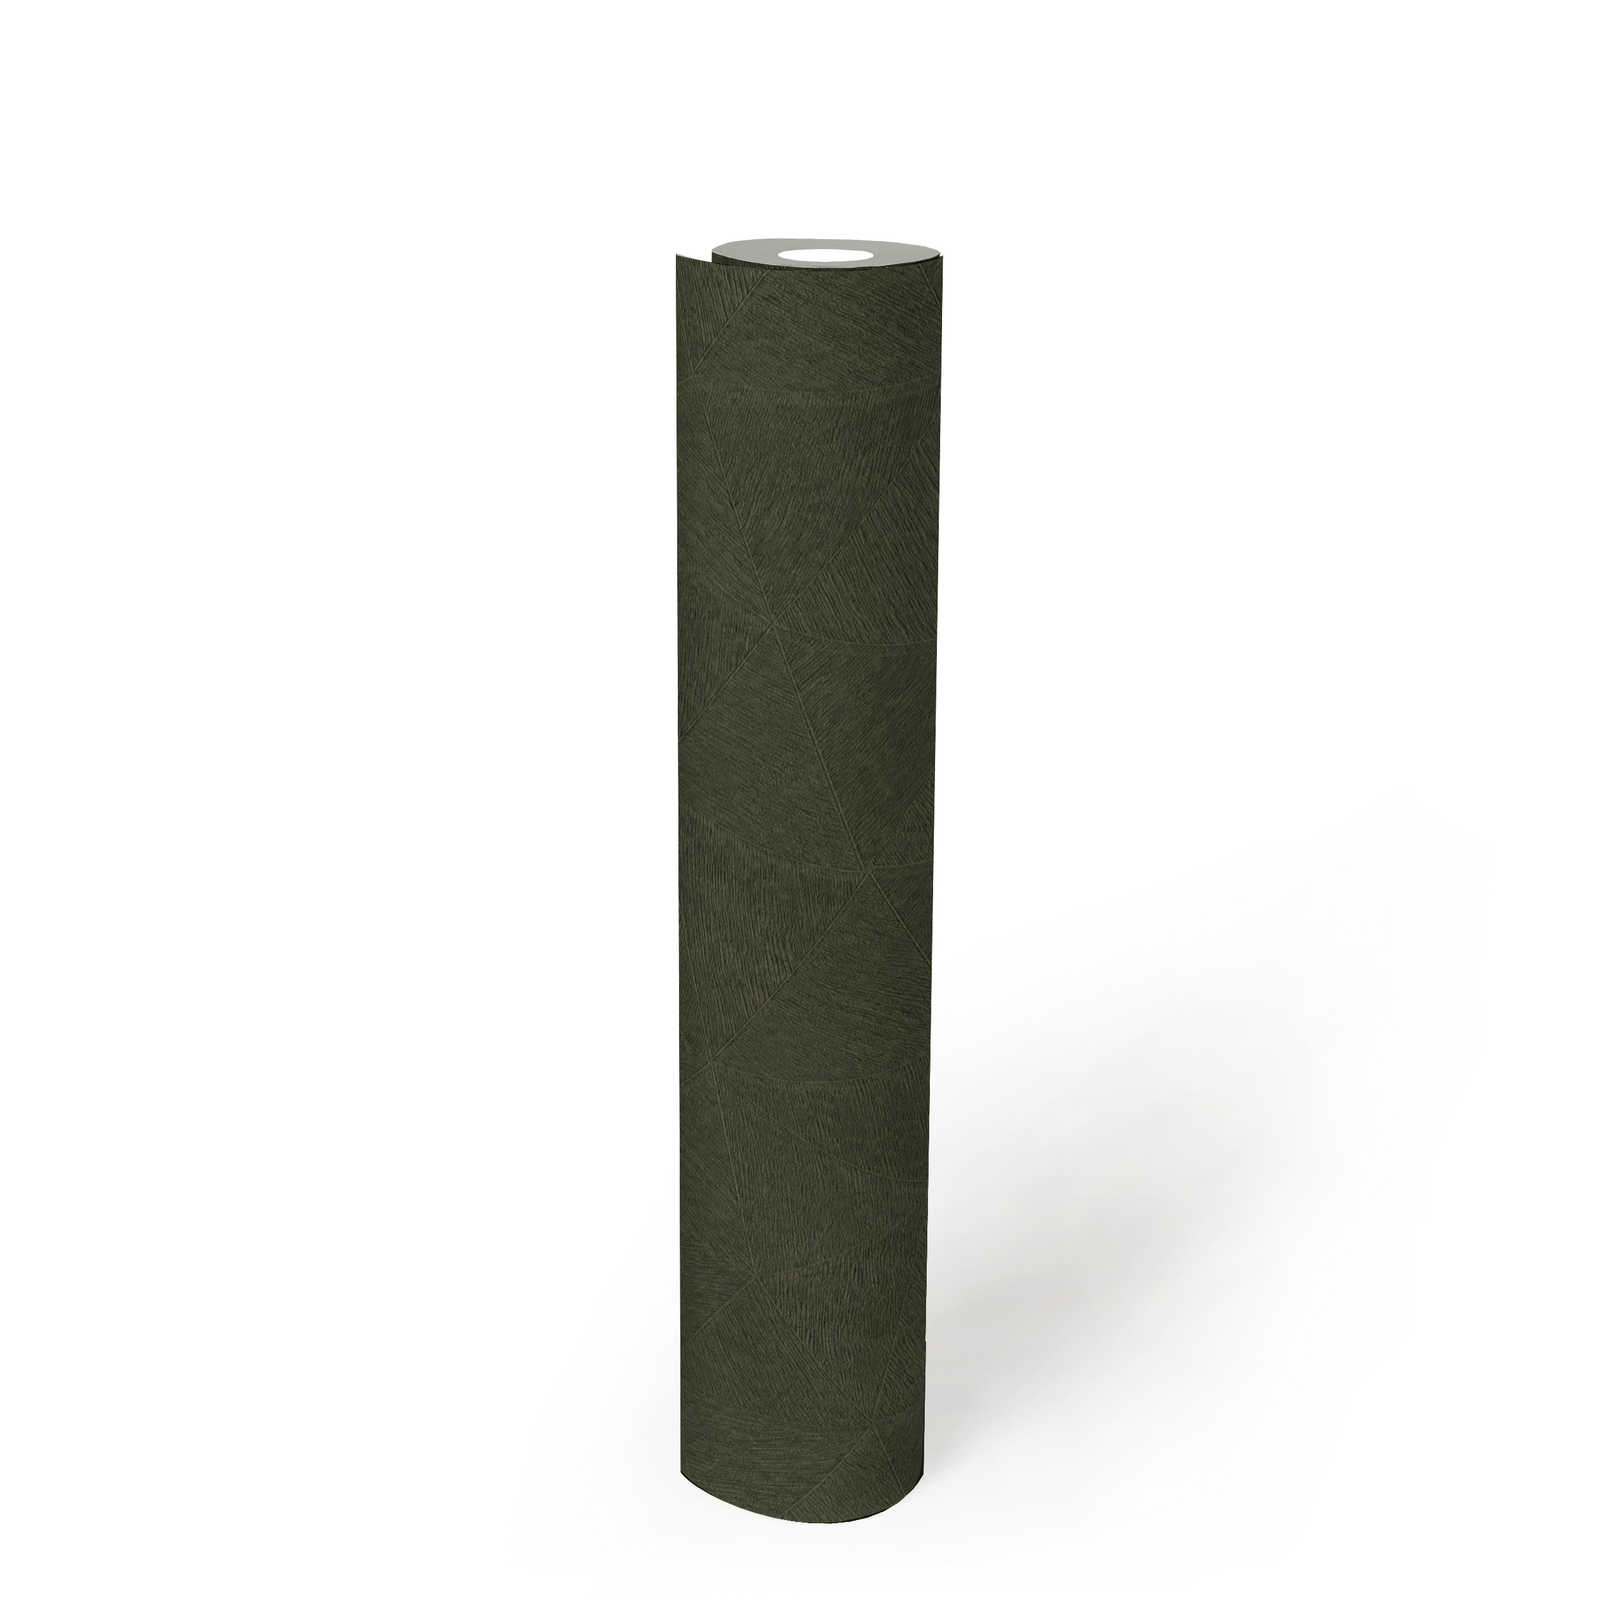             Non-woven wallpaper with subtle graphic pattern - green
        